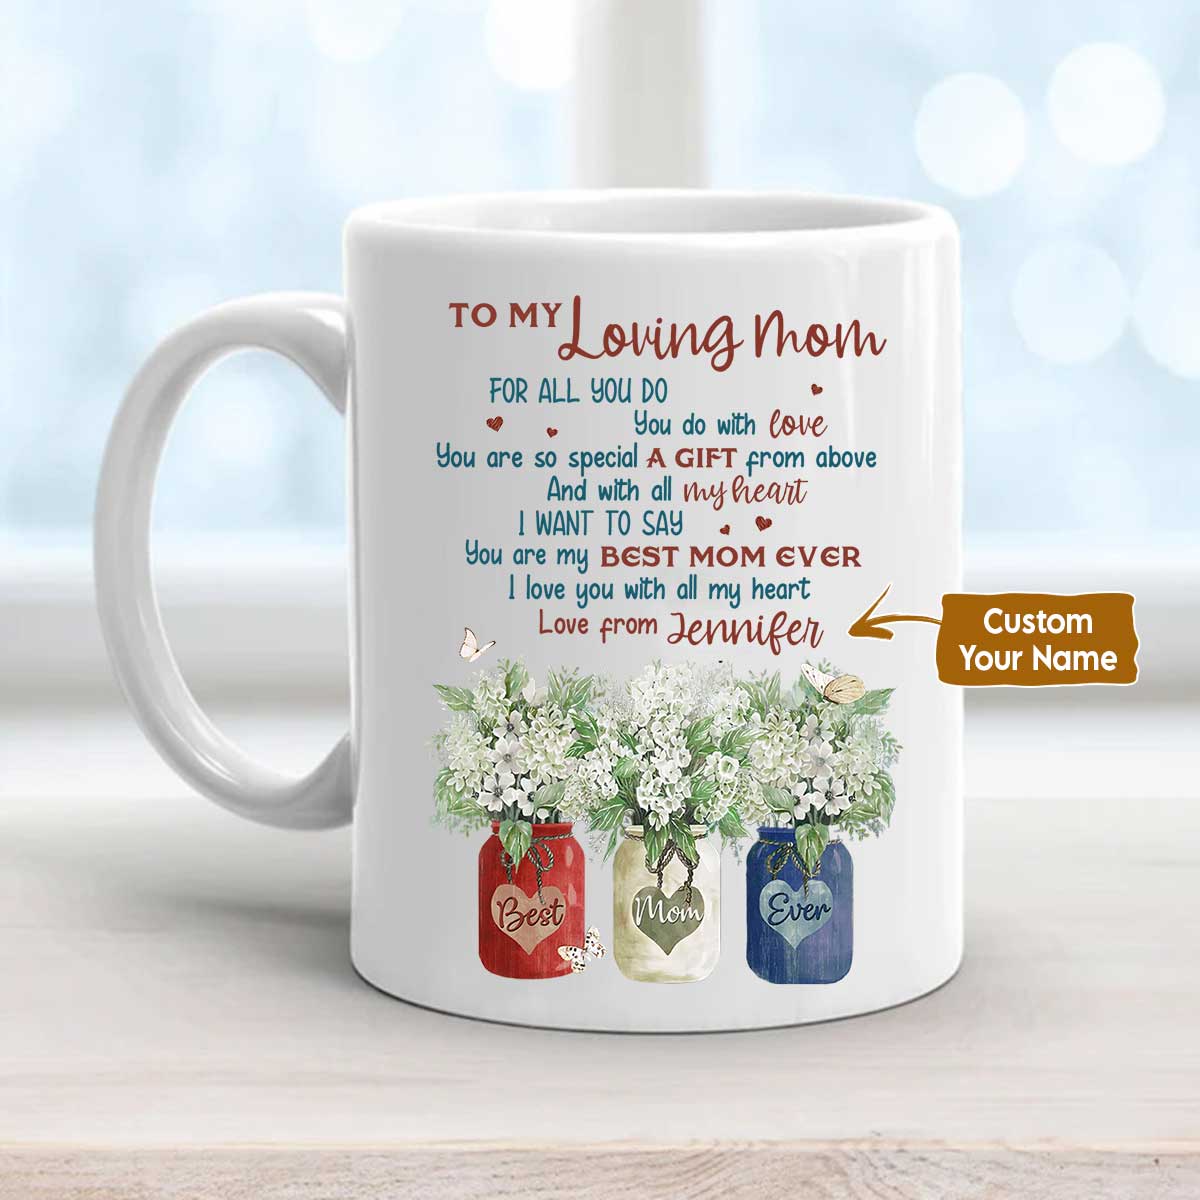 Gift For Mom Personalized Mug - To My Loving Mom,Daughter to mom, White flower garden, Butterfly Mug - Custom Gift For Mother's Day, Presents for Mom